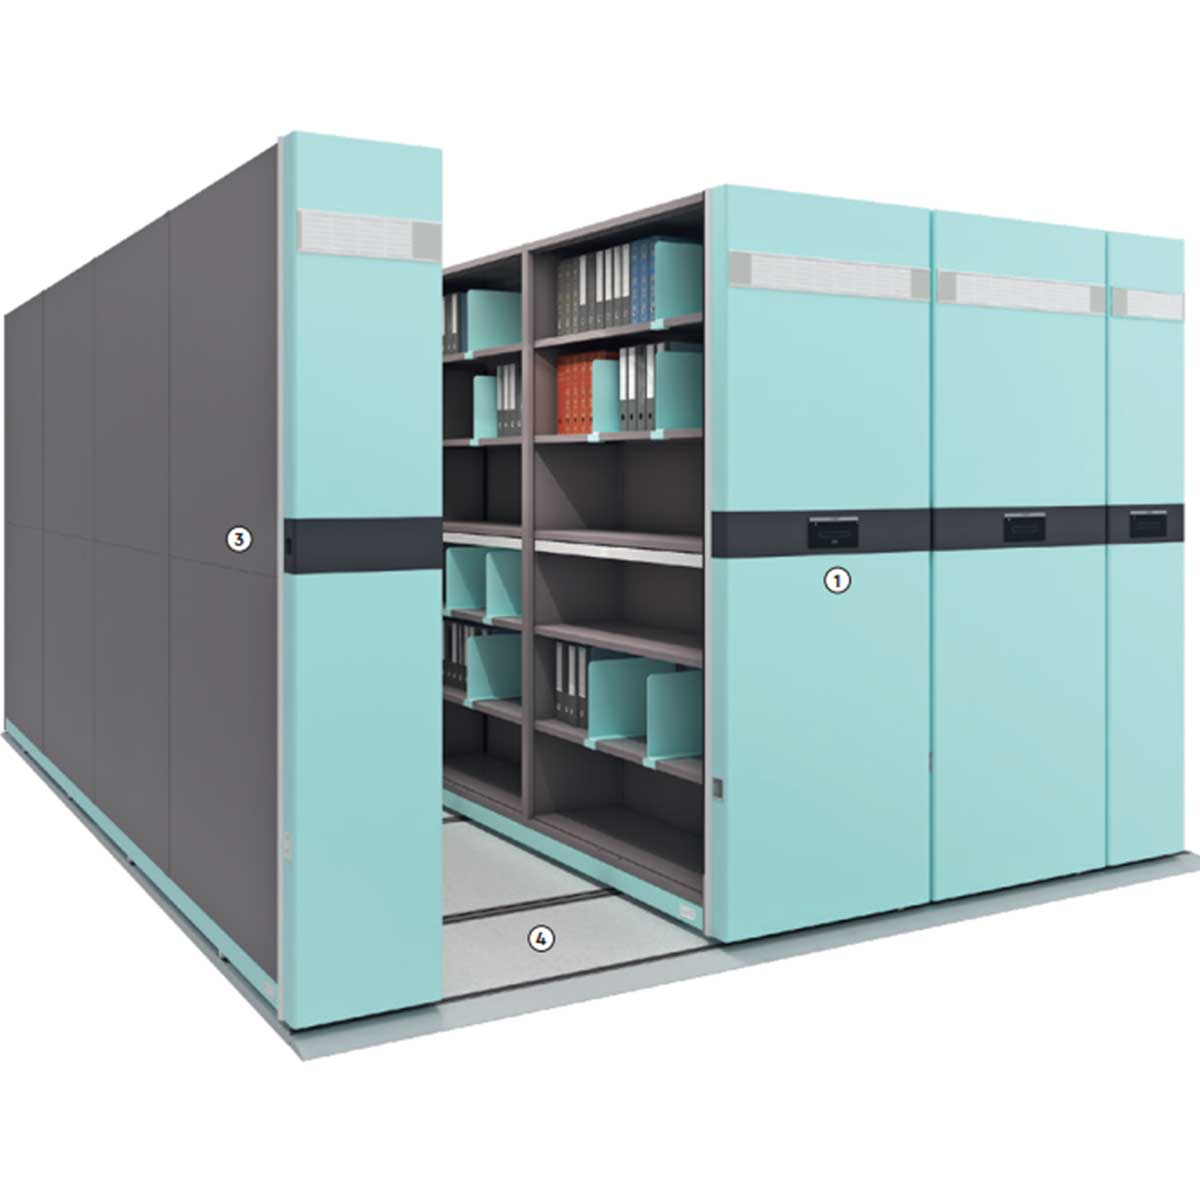 Mobile compactor storage Manufacturers, Suppliers in Nehru Place